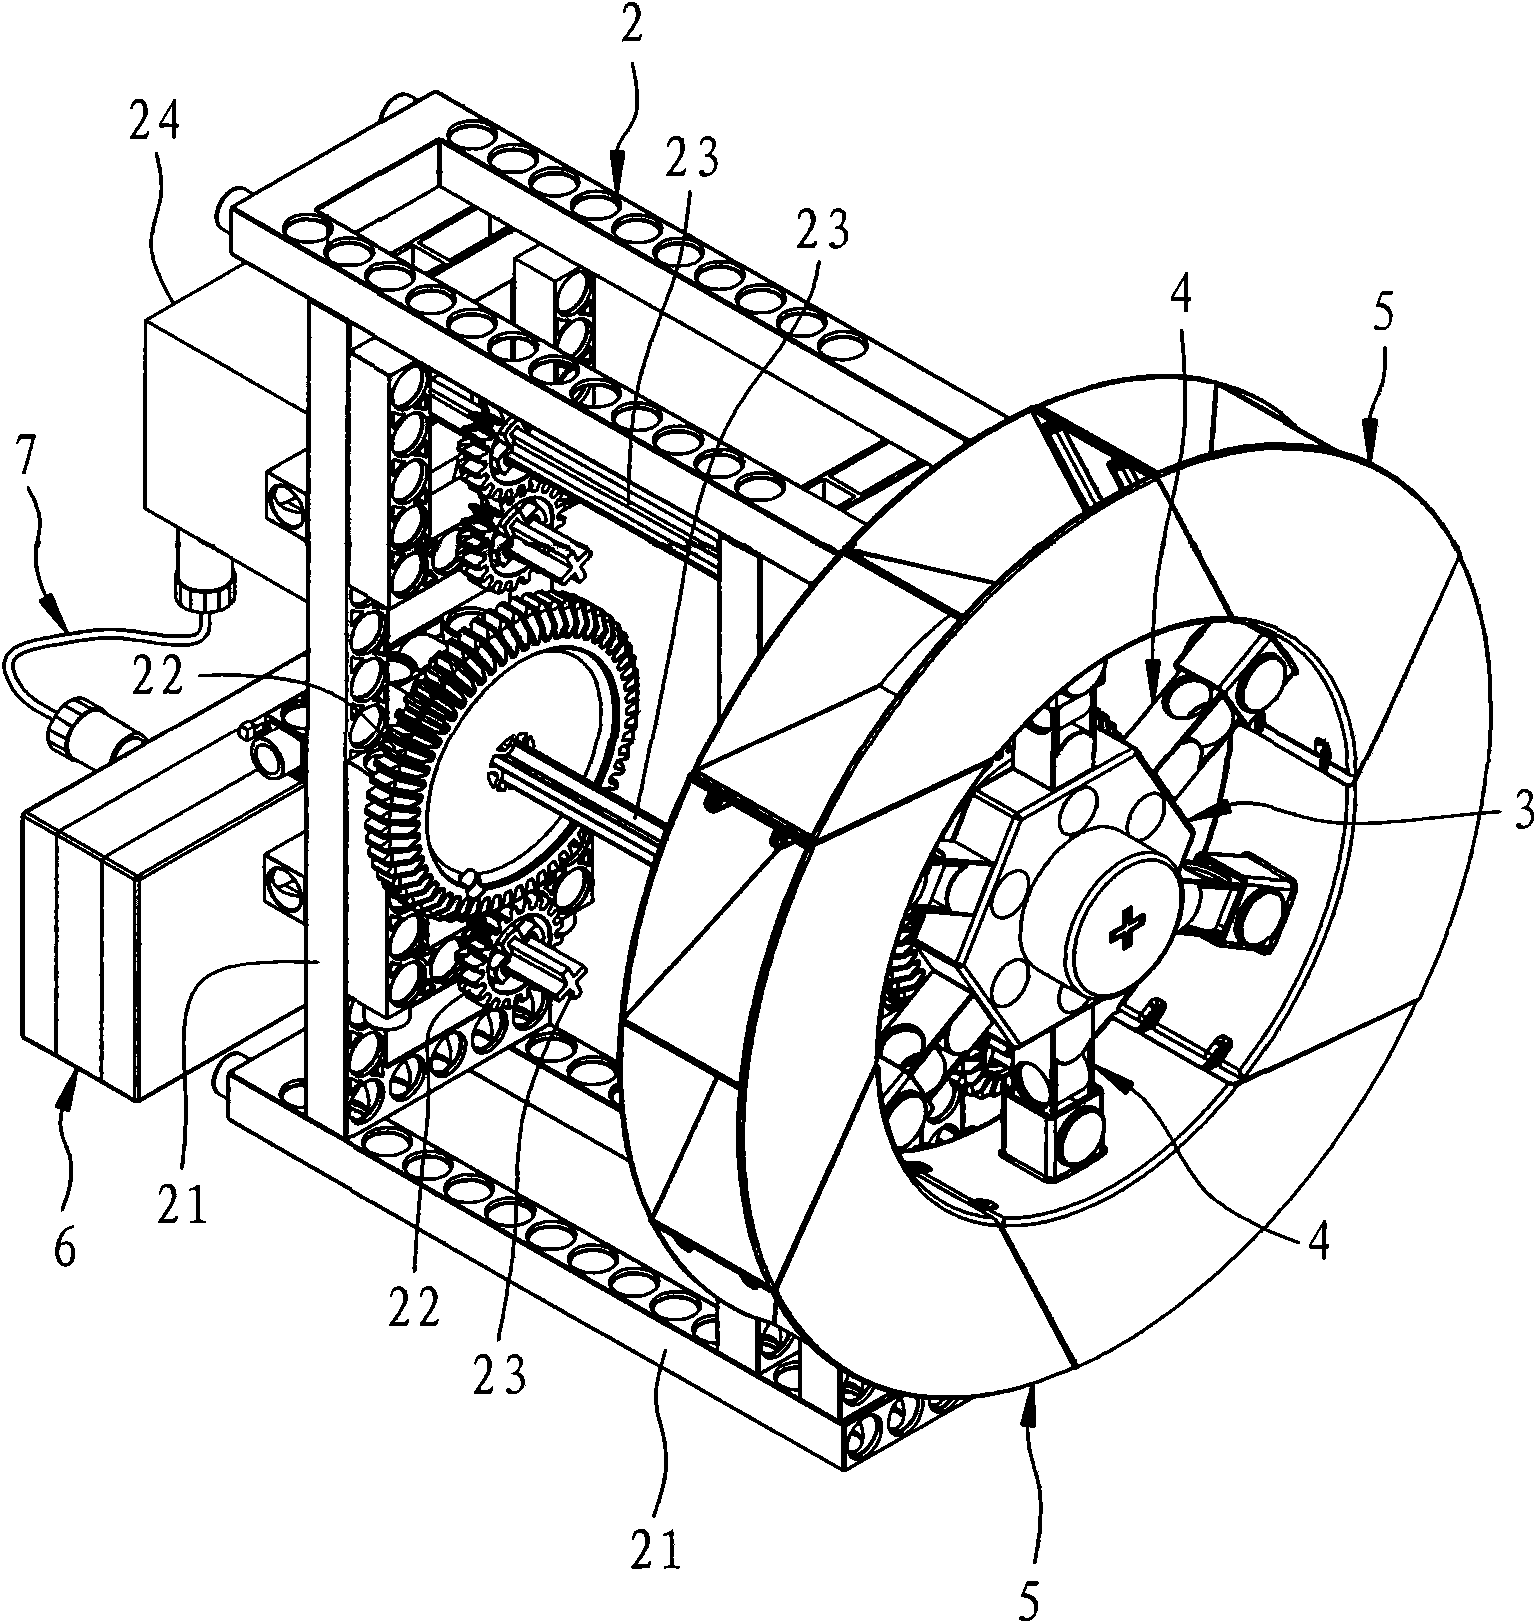 Impeller-type building block assembly